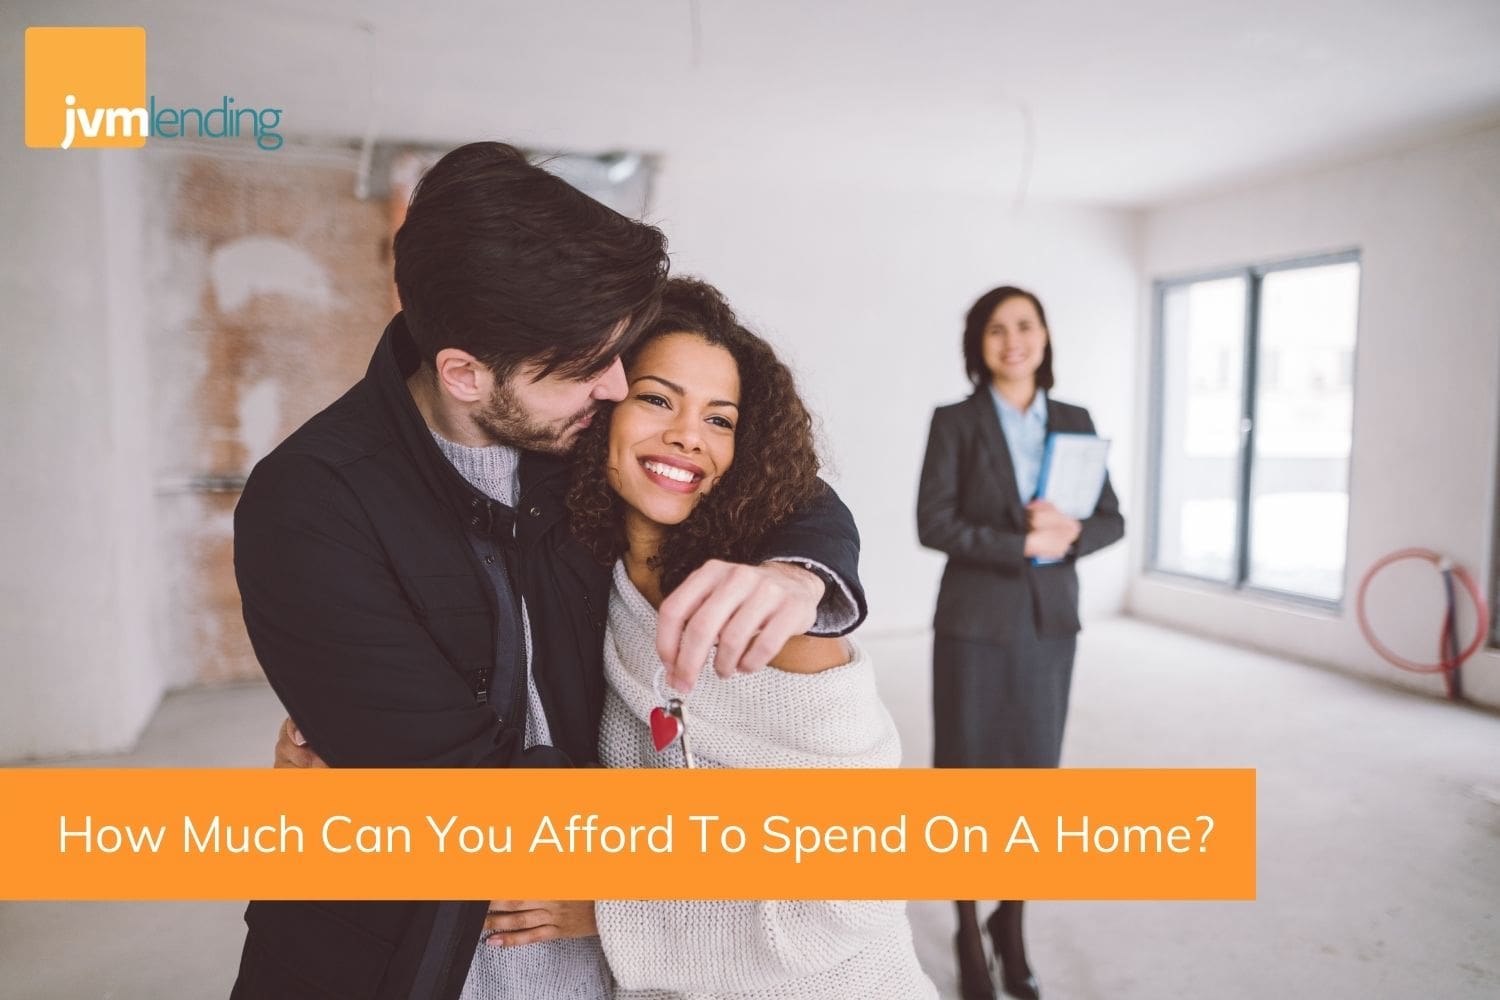 A young couples smiles while holding the keys to a new home with their real estate agent. After careful planning, they found out how much they could afford to spend on a home and purchased their first home.